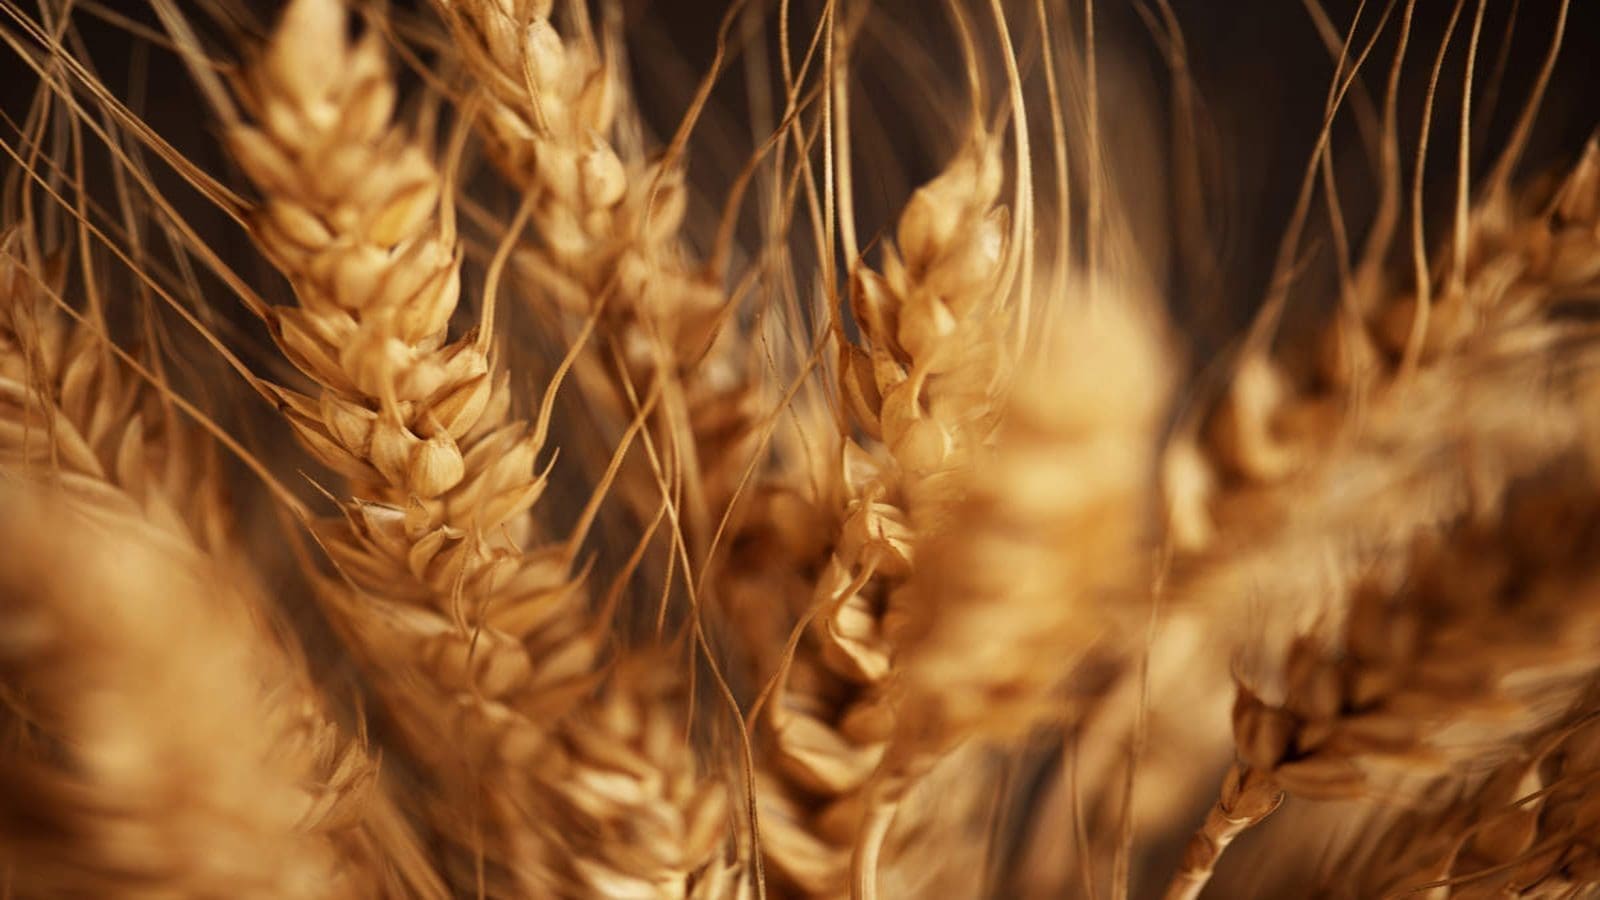 Egypt declares a ban on third-party wheat trading as it grapples with a global wheat shortage